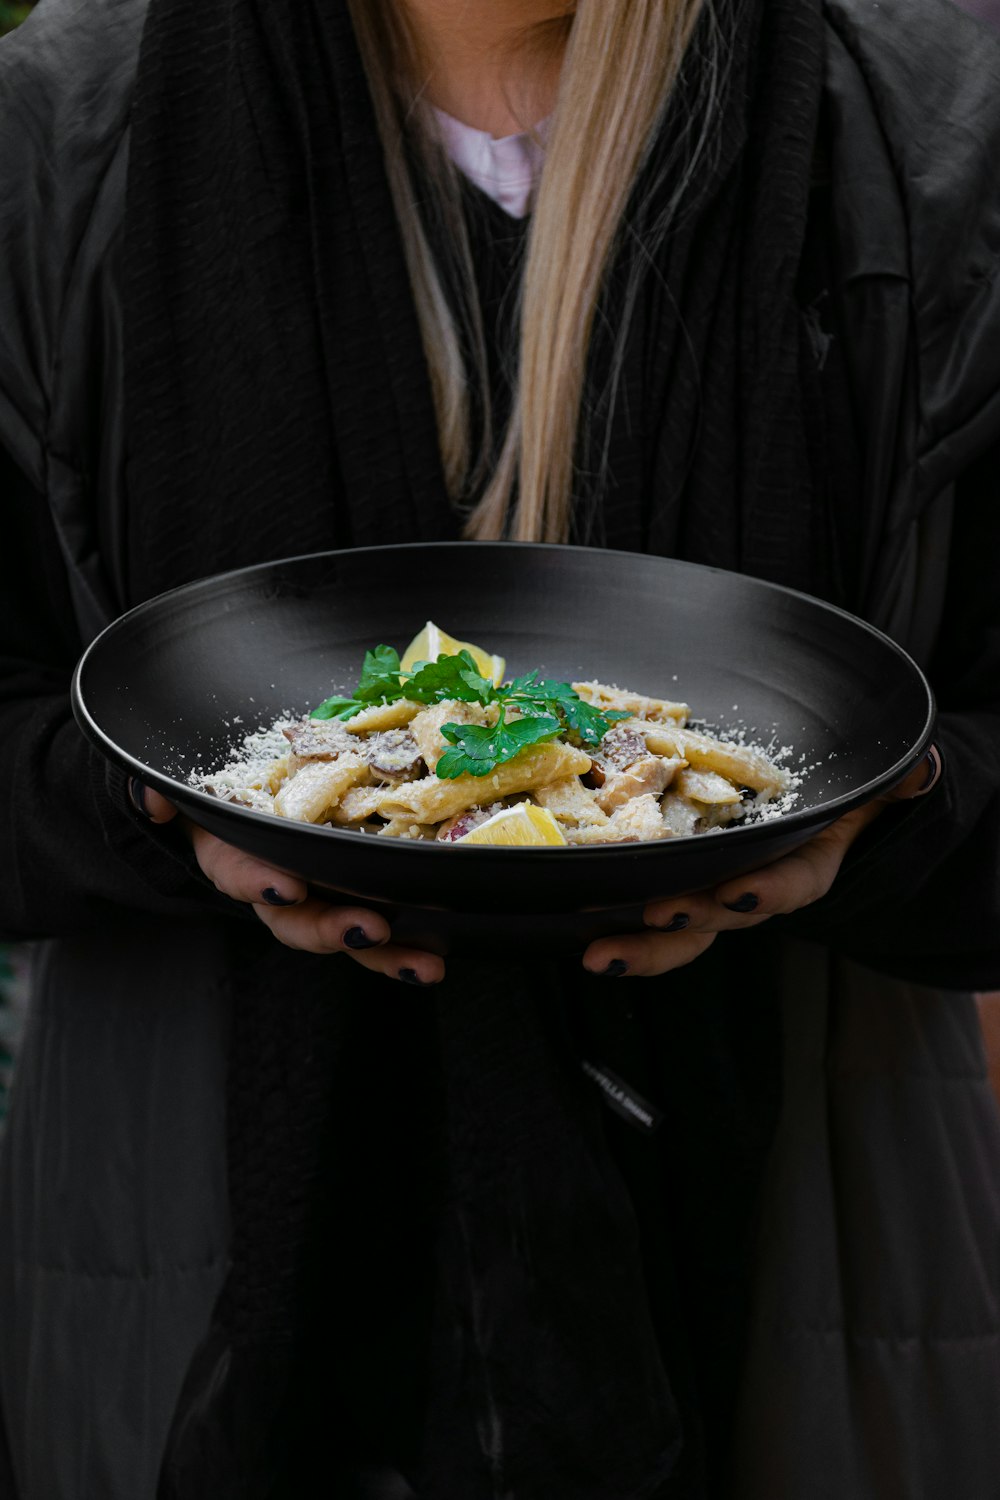 woman in black jacket holding black bowl with vegetable salad